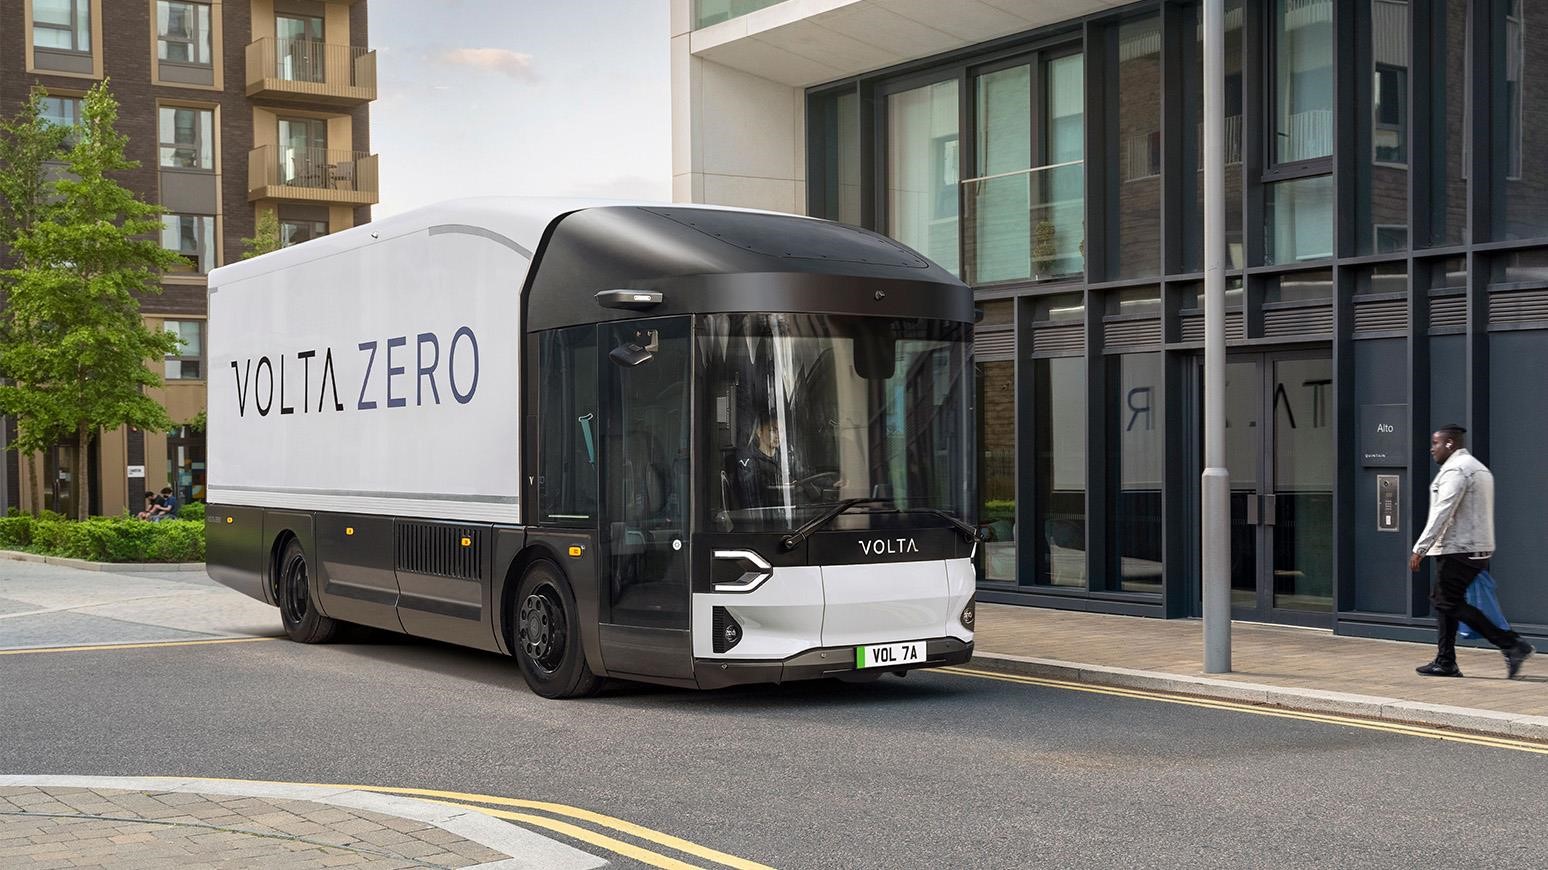 All-Electric Volta Zero To Make First Public Appearance At IAA Transportation In Hanover